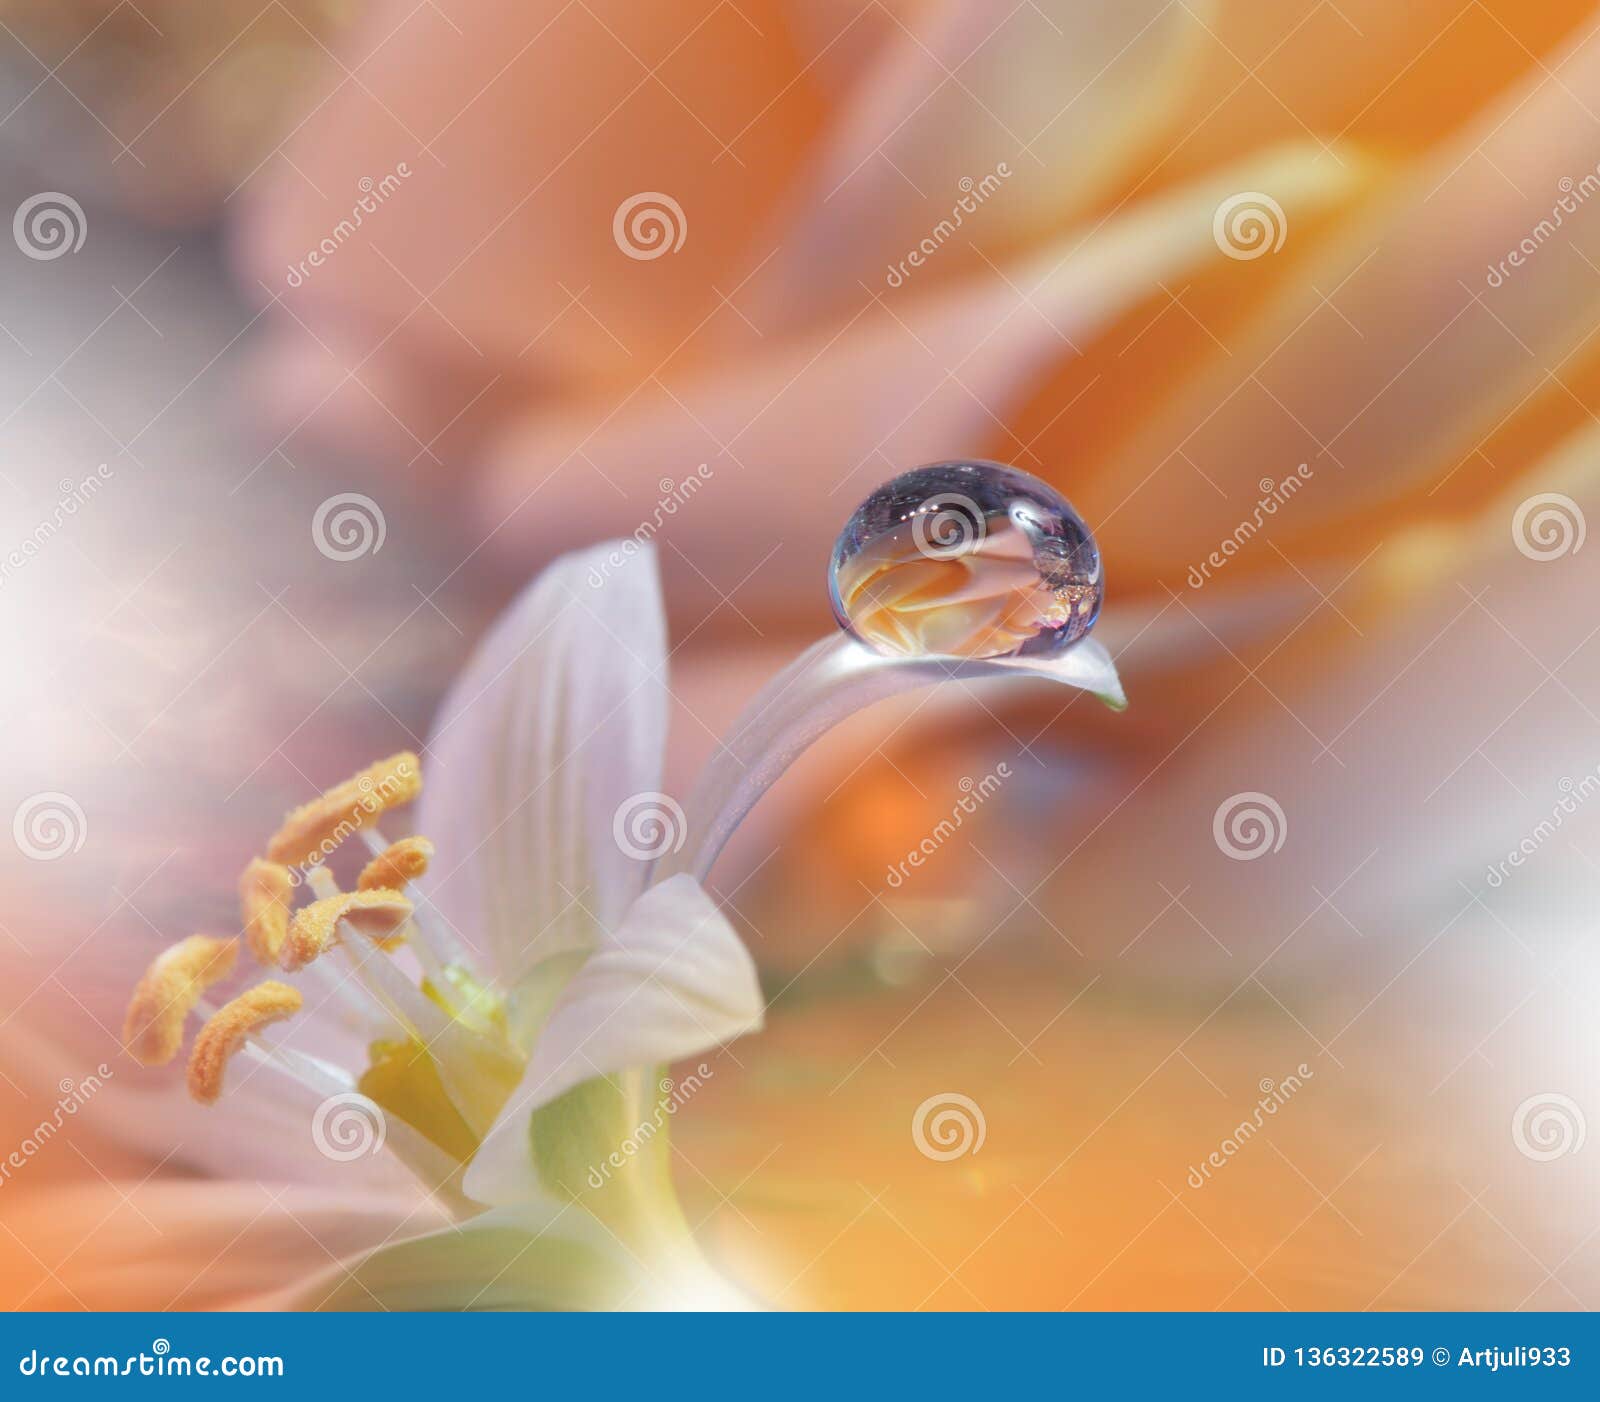 spring nature blossom web banner or header.abstract macro photo.artistic background.fantasy .colorful wallpaper.artwork,drop